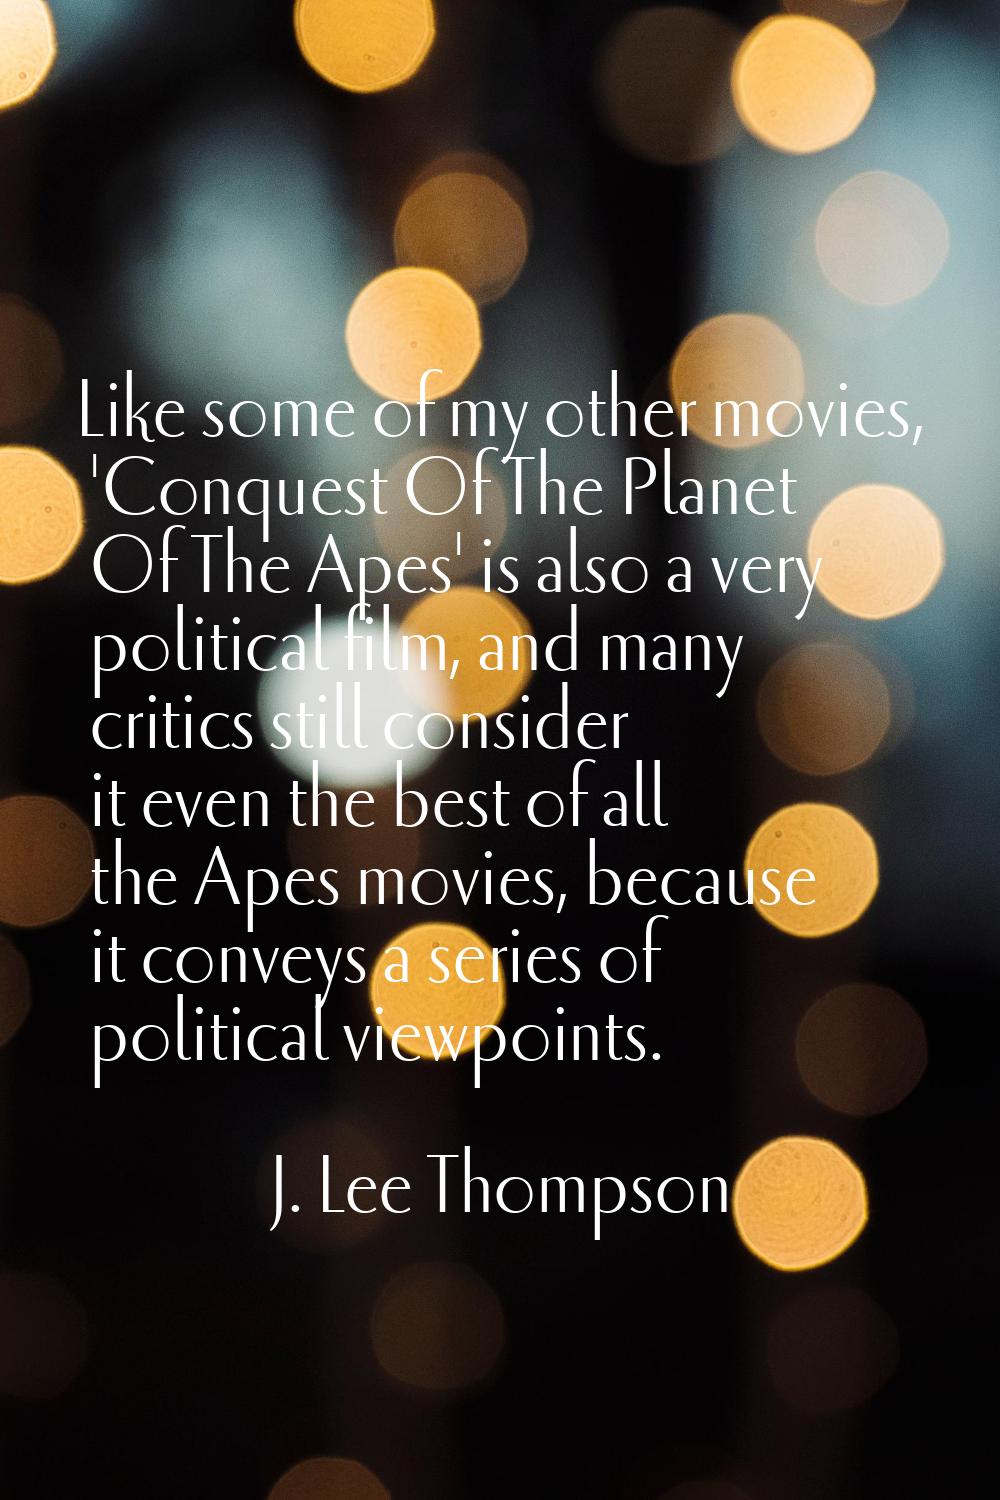 Like some of my other movies, 'Conquest Of The Planet Of The Apes' is also a very political film, a